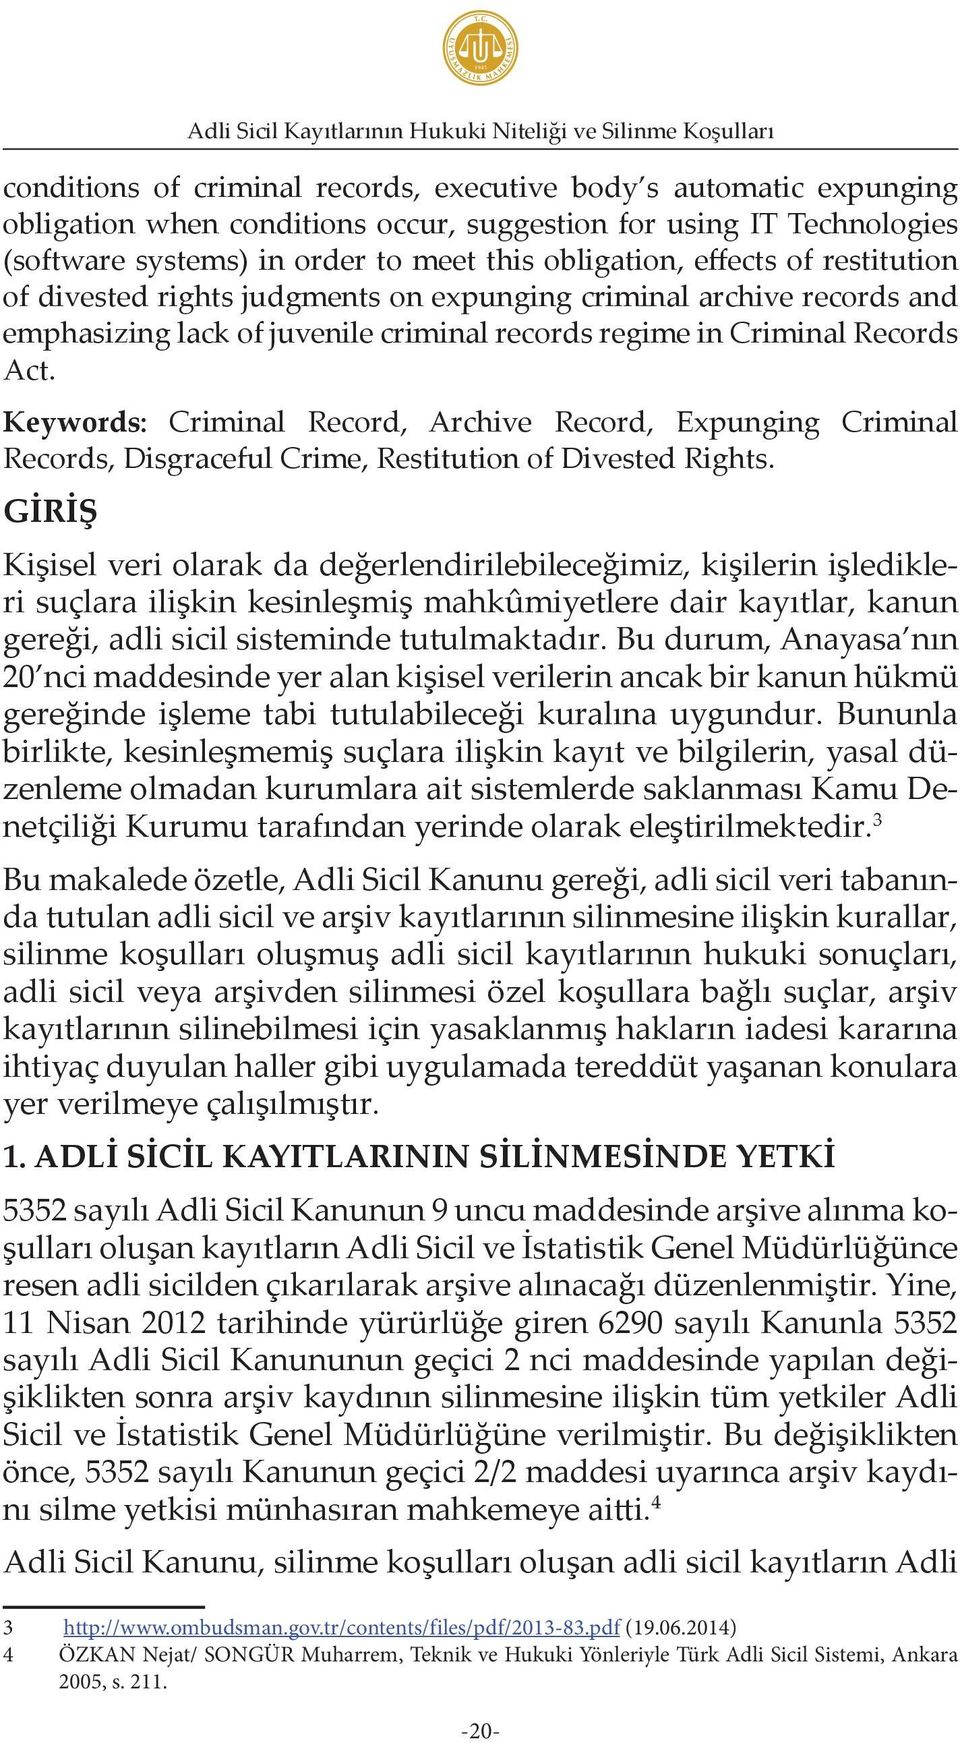 records regime in Criminal Records Act. Keywords: Criminal Record, Archive Record, Expunging Criminal Records, Disgraceful Crime, Restitution of Divested Rights.